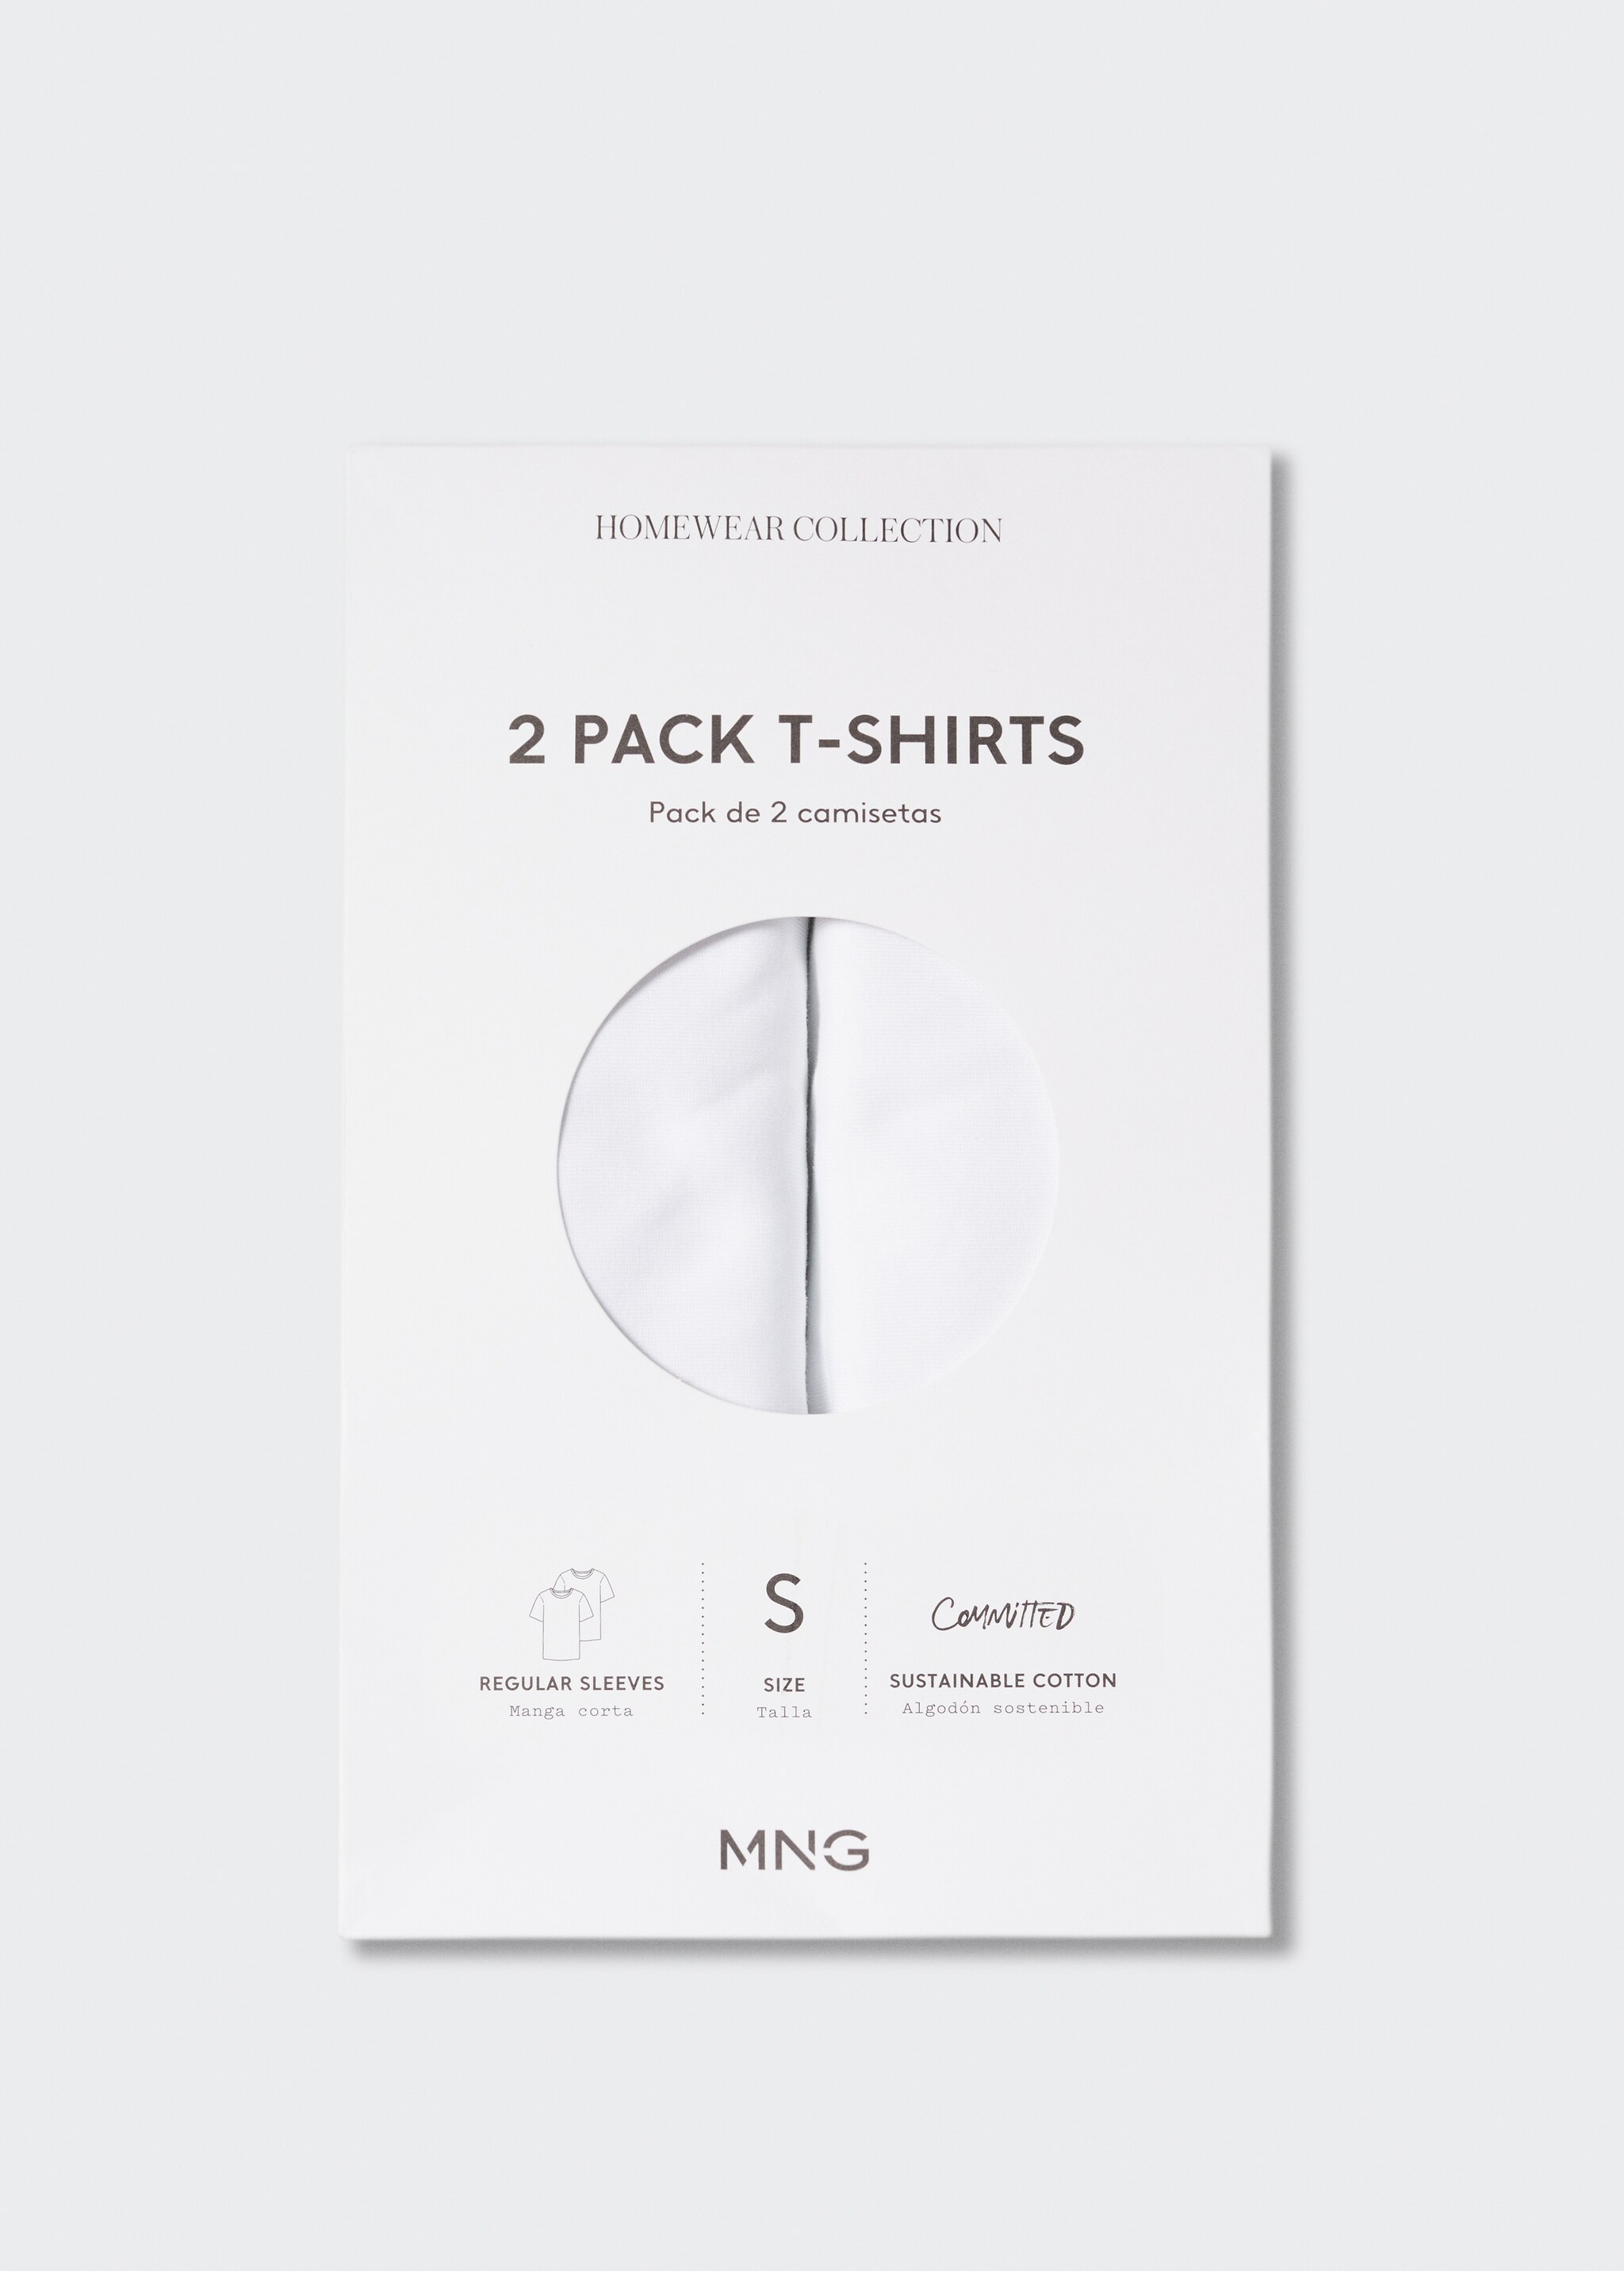 2 pack cotton t-shirt - Article without model